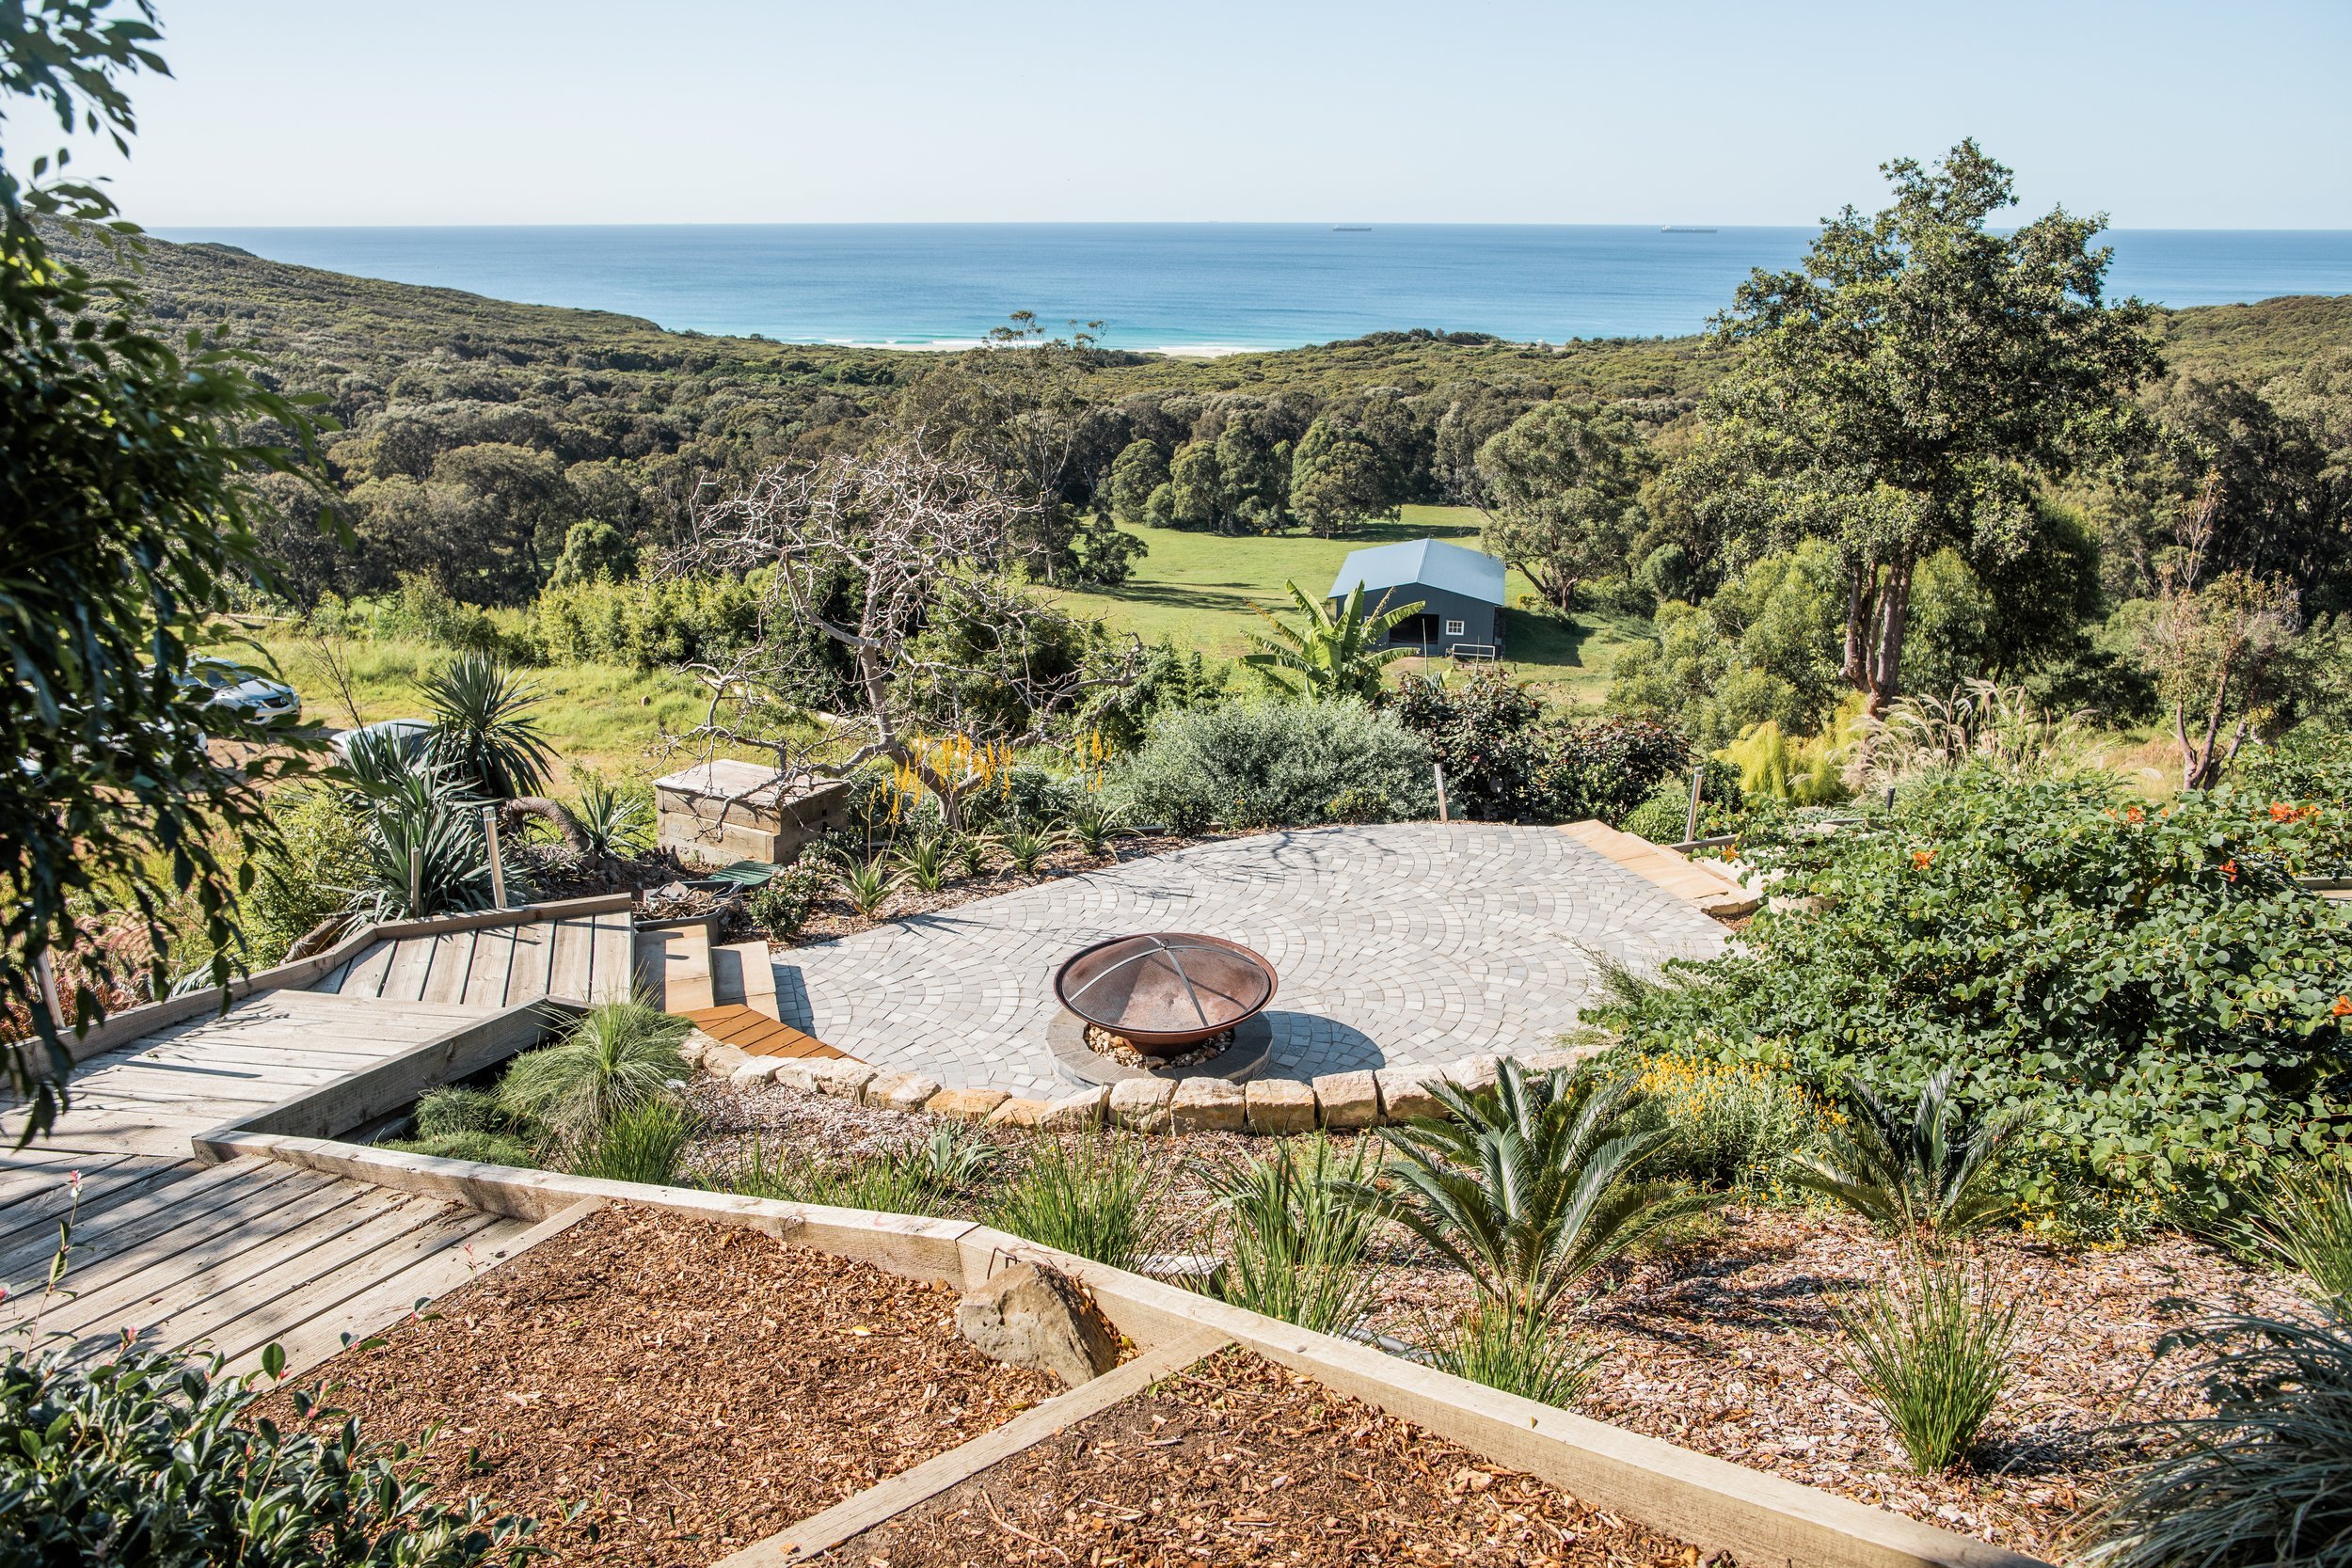  Landscaping Services located in Newcastle NSW | Landscaping Services based in Hunter Region, Newcastle | Landscaping companies Newcastle NSW | Pool Landscaping NSW, Backyard landscaping Newcastle, Landscaping NSW, Landscaping companies Sydney, Lands